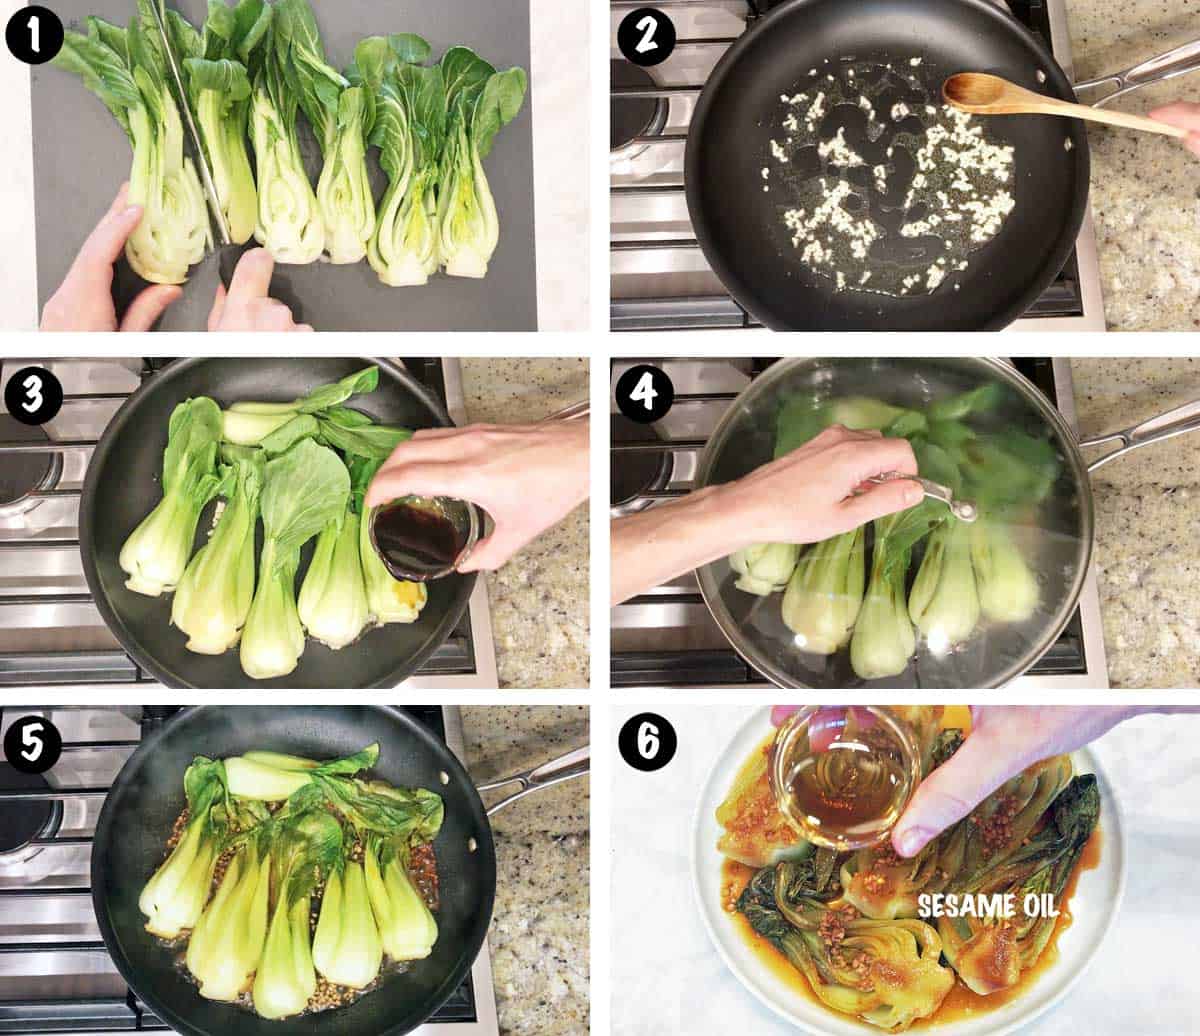 A photo collage showing the steps for cooking bok choy. 